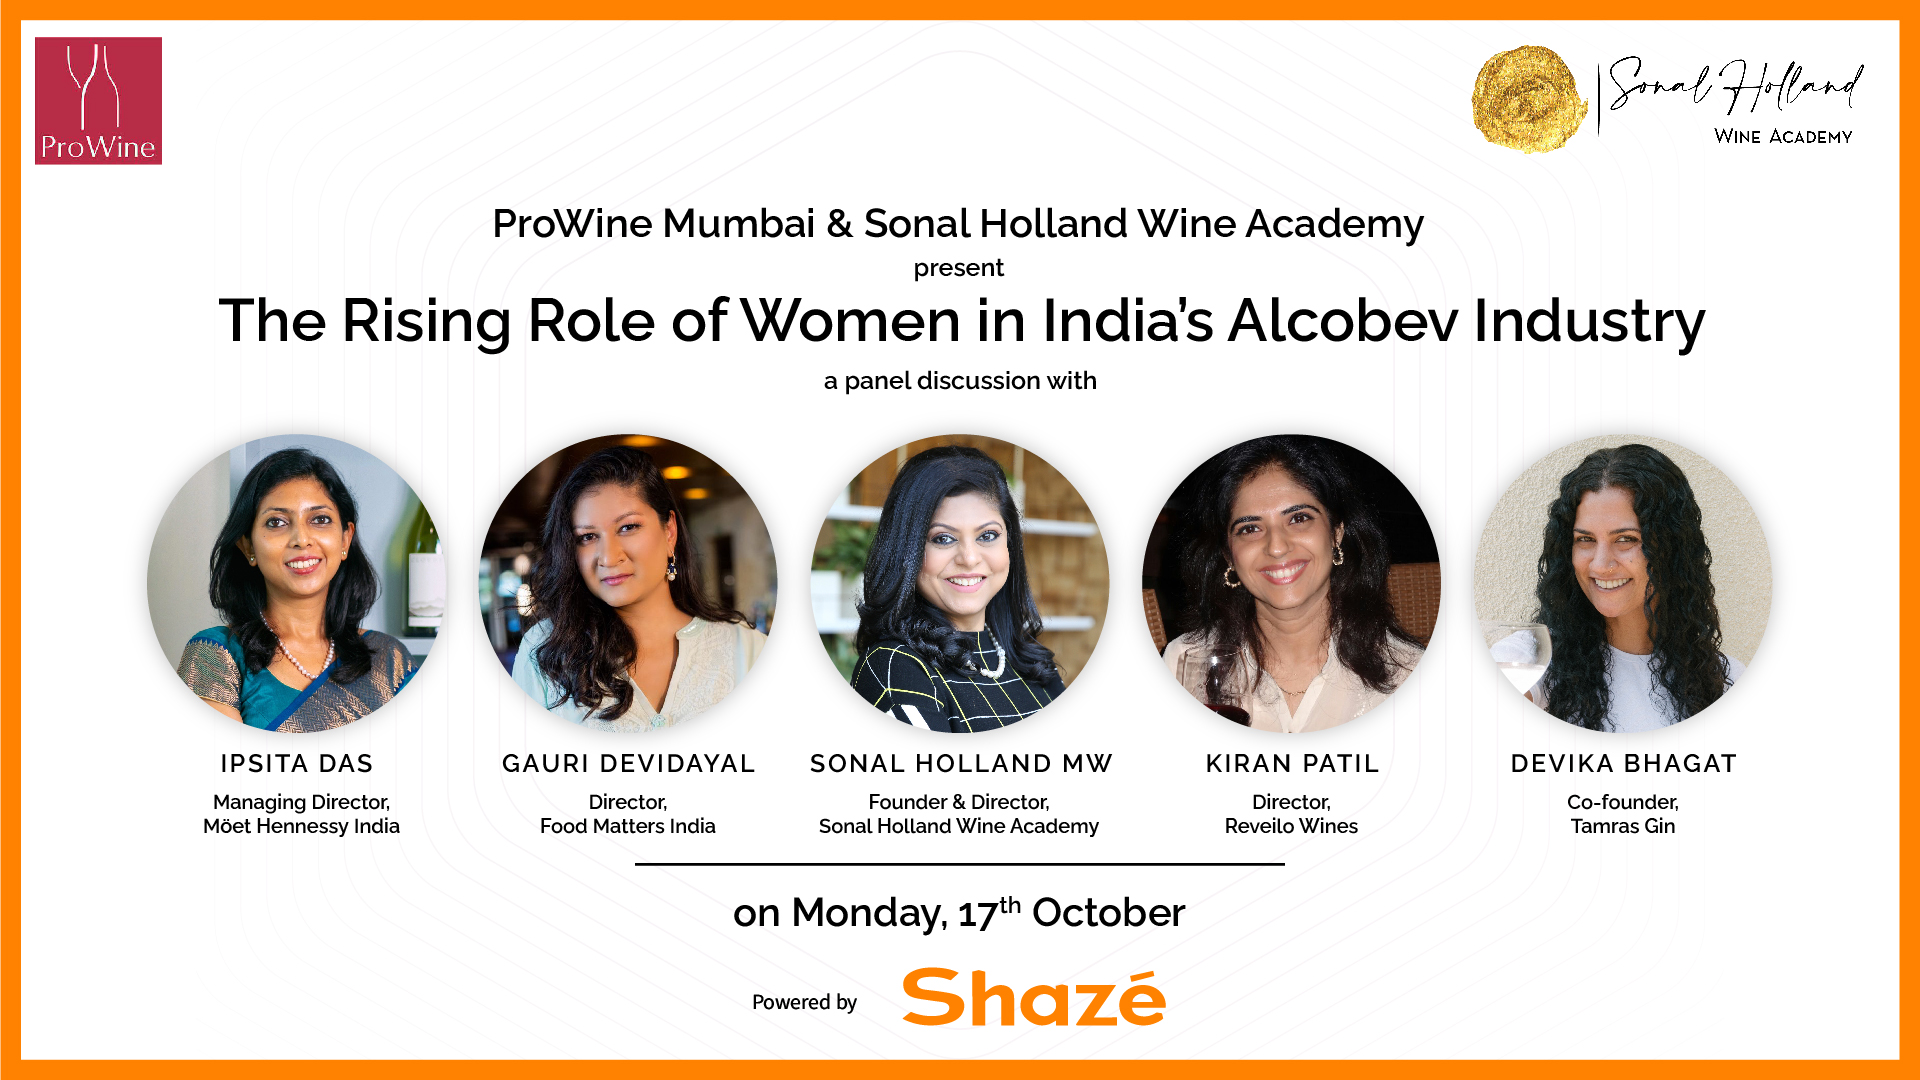 The-Rising-Role-of-Women-in-India-Alcobev-Industry-02